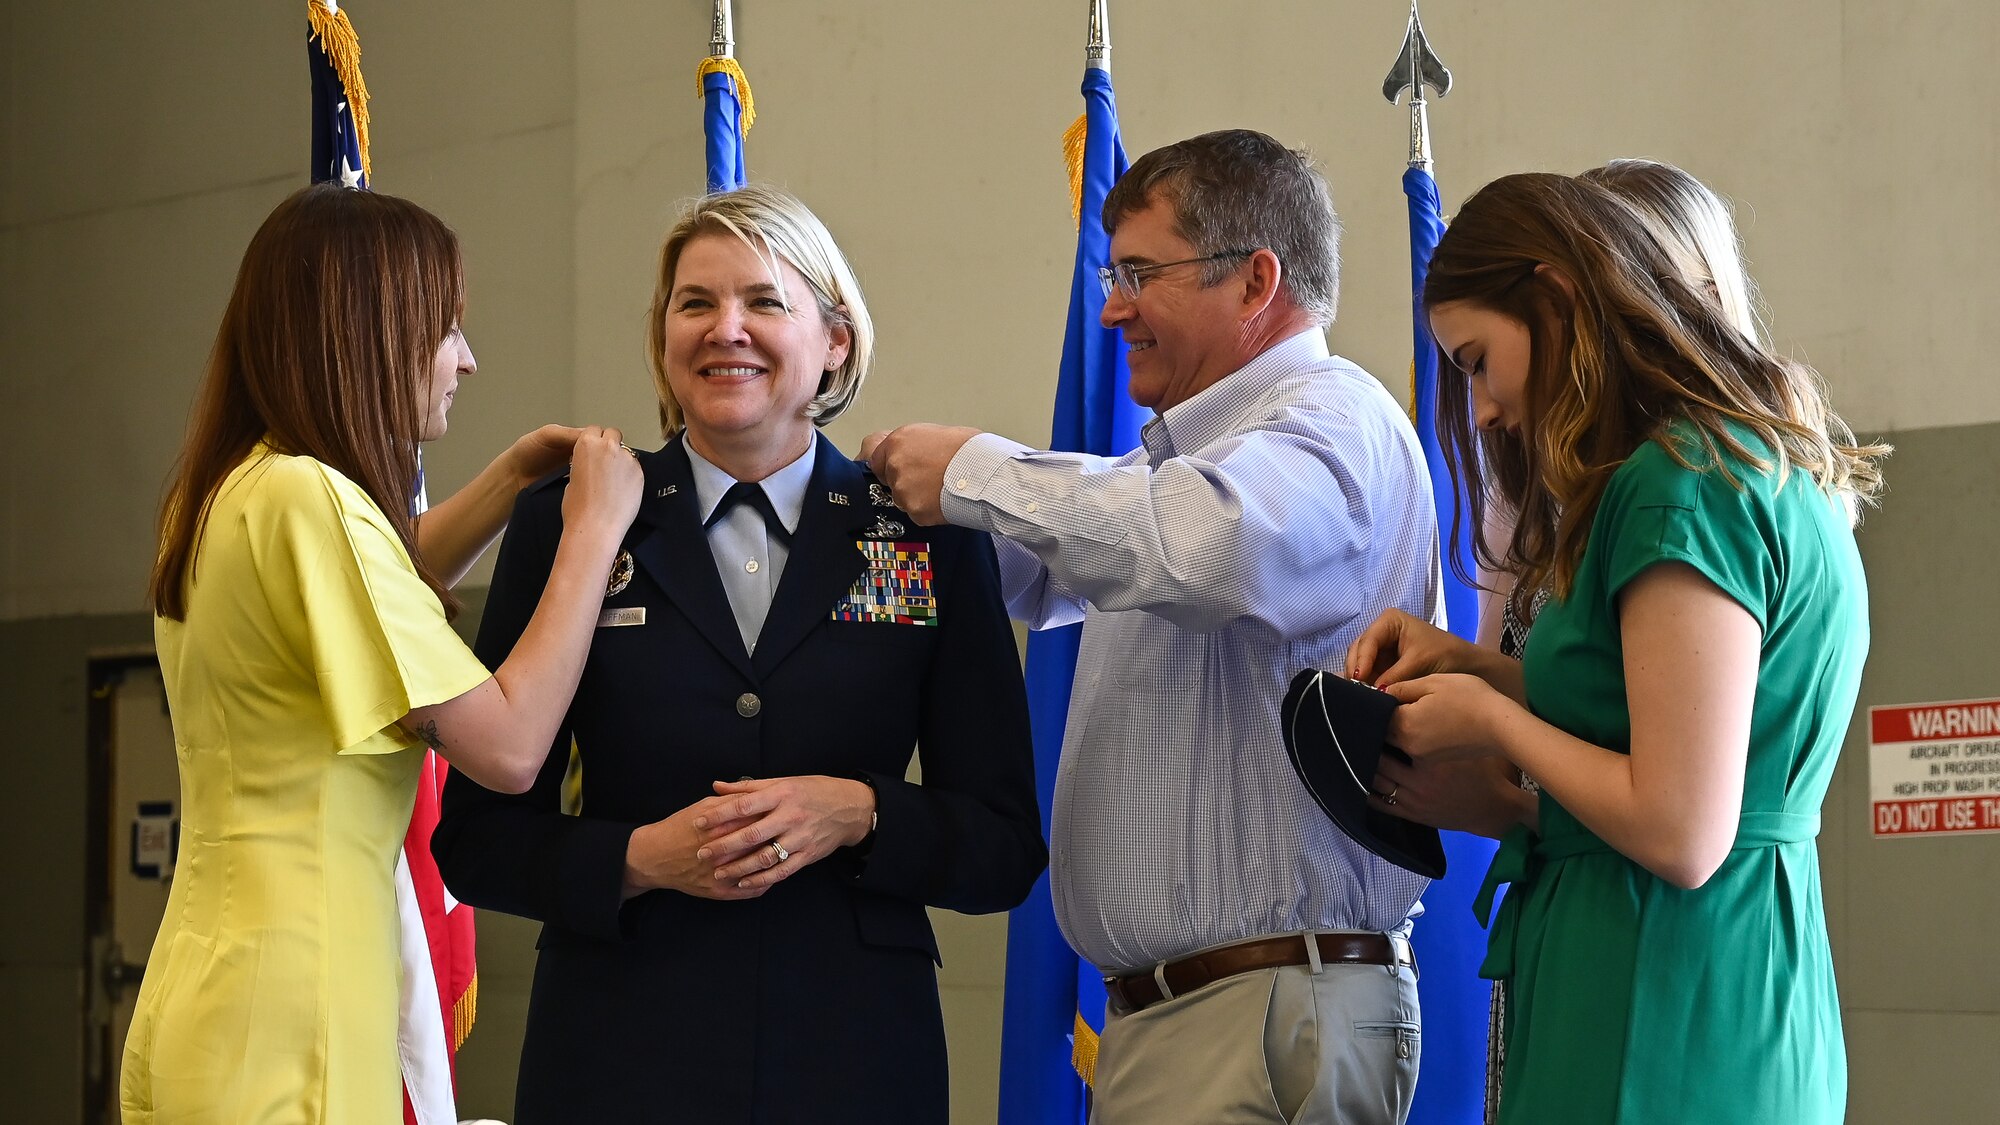 Brig. Gen. McCauley von Hoffman, Ogden Air Logistic Complex commander, is pinned with the rank of major general during a promotion ceremony at Hill Air Force Base, Utah, May 7, 2021. (U.S. Air Force photo by R. Nial Bradshaw)